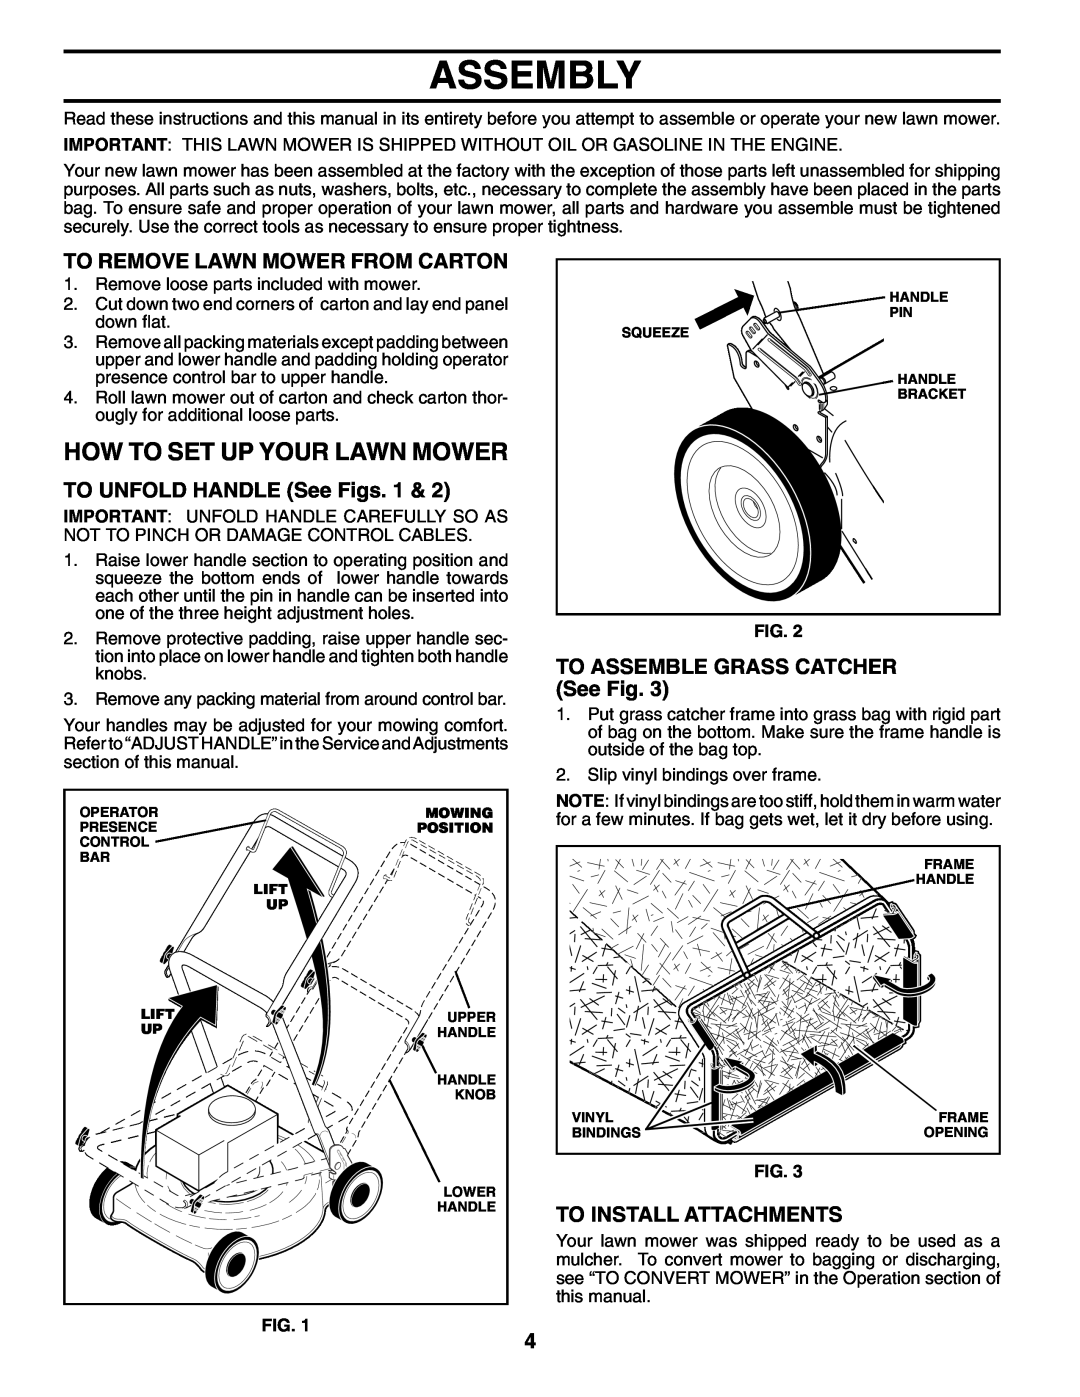 Husqvarna 5521BBC Assembly, How To Set Up Your Lawn Mower, To Remove Lawn Mower From Carton, TO UNFOLD HANDLE See Figs 